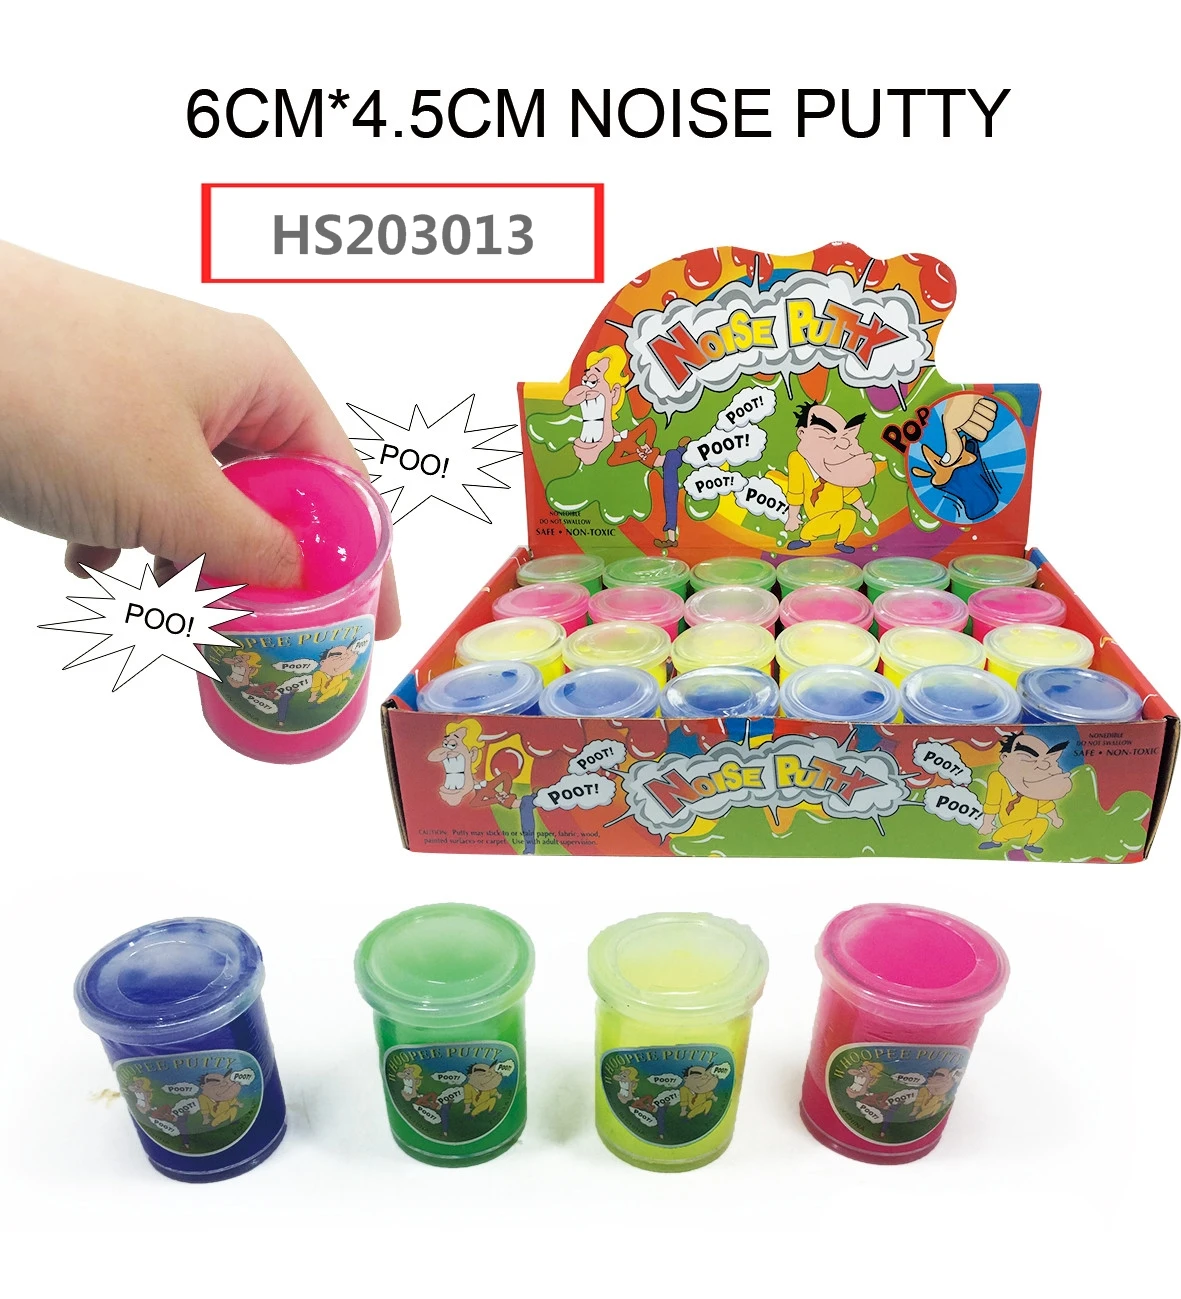 HS203013, Huwsin Toys, Noise putty, Slime,Whole person toy